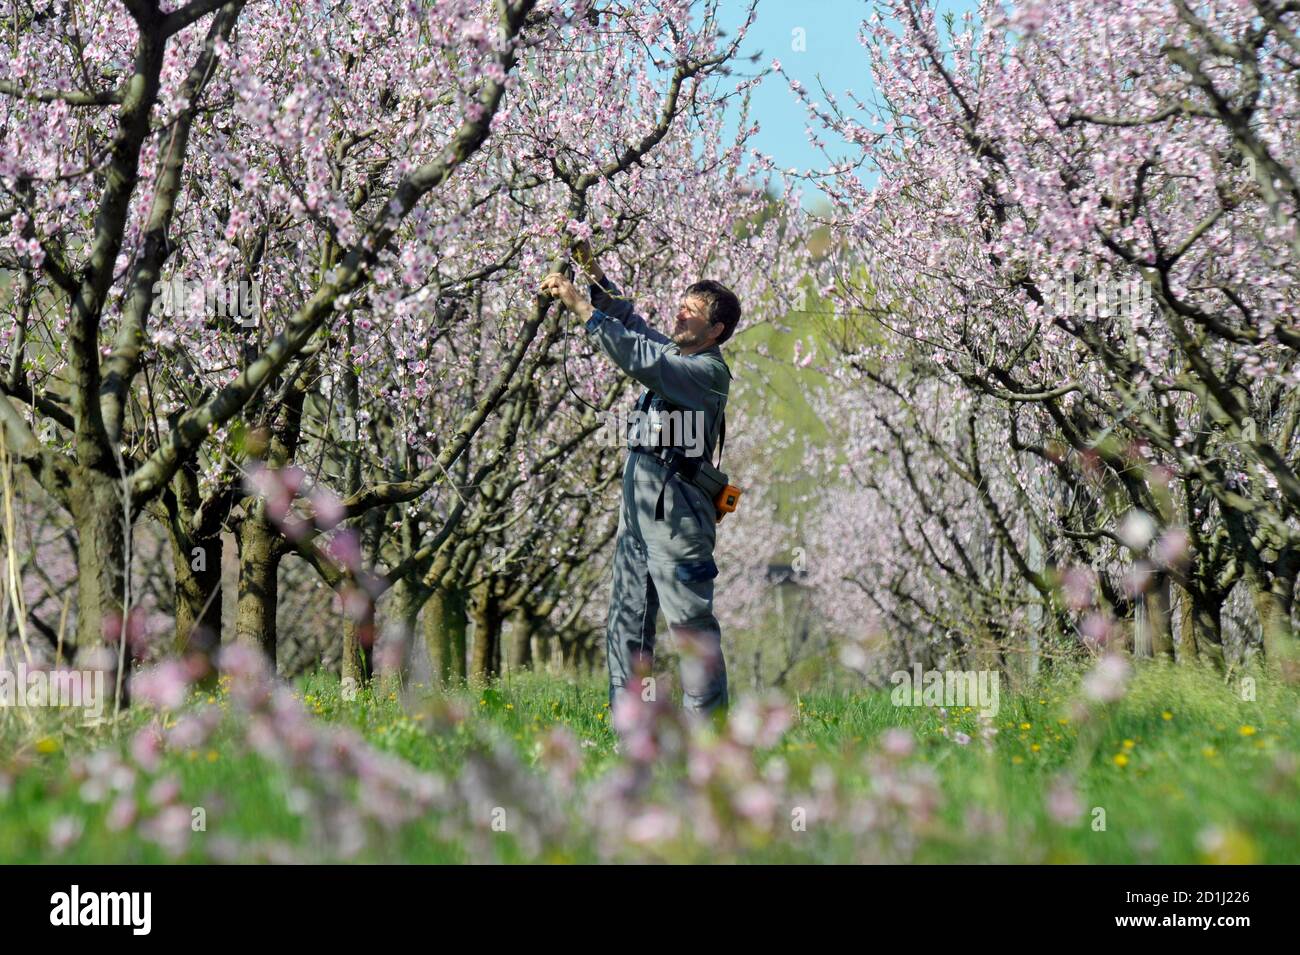 Plantation owner Tomaz Gregoric cuts a branch on a blooming peach tree in  Vogrsko, West Slovenia April 9, 2010. REUTERS/Srdjan Zivulovic (SLOVENIA -  Tags: AGRICULTURE ENVIRONMENT Stock Photo - Alamy